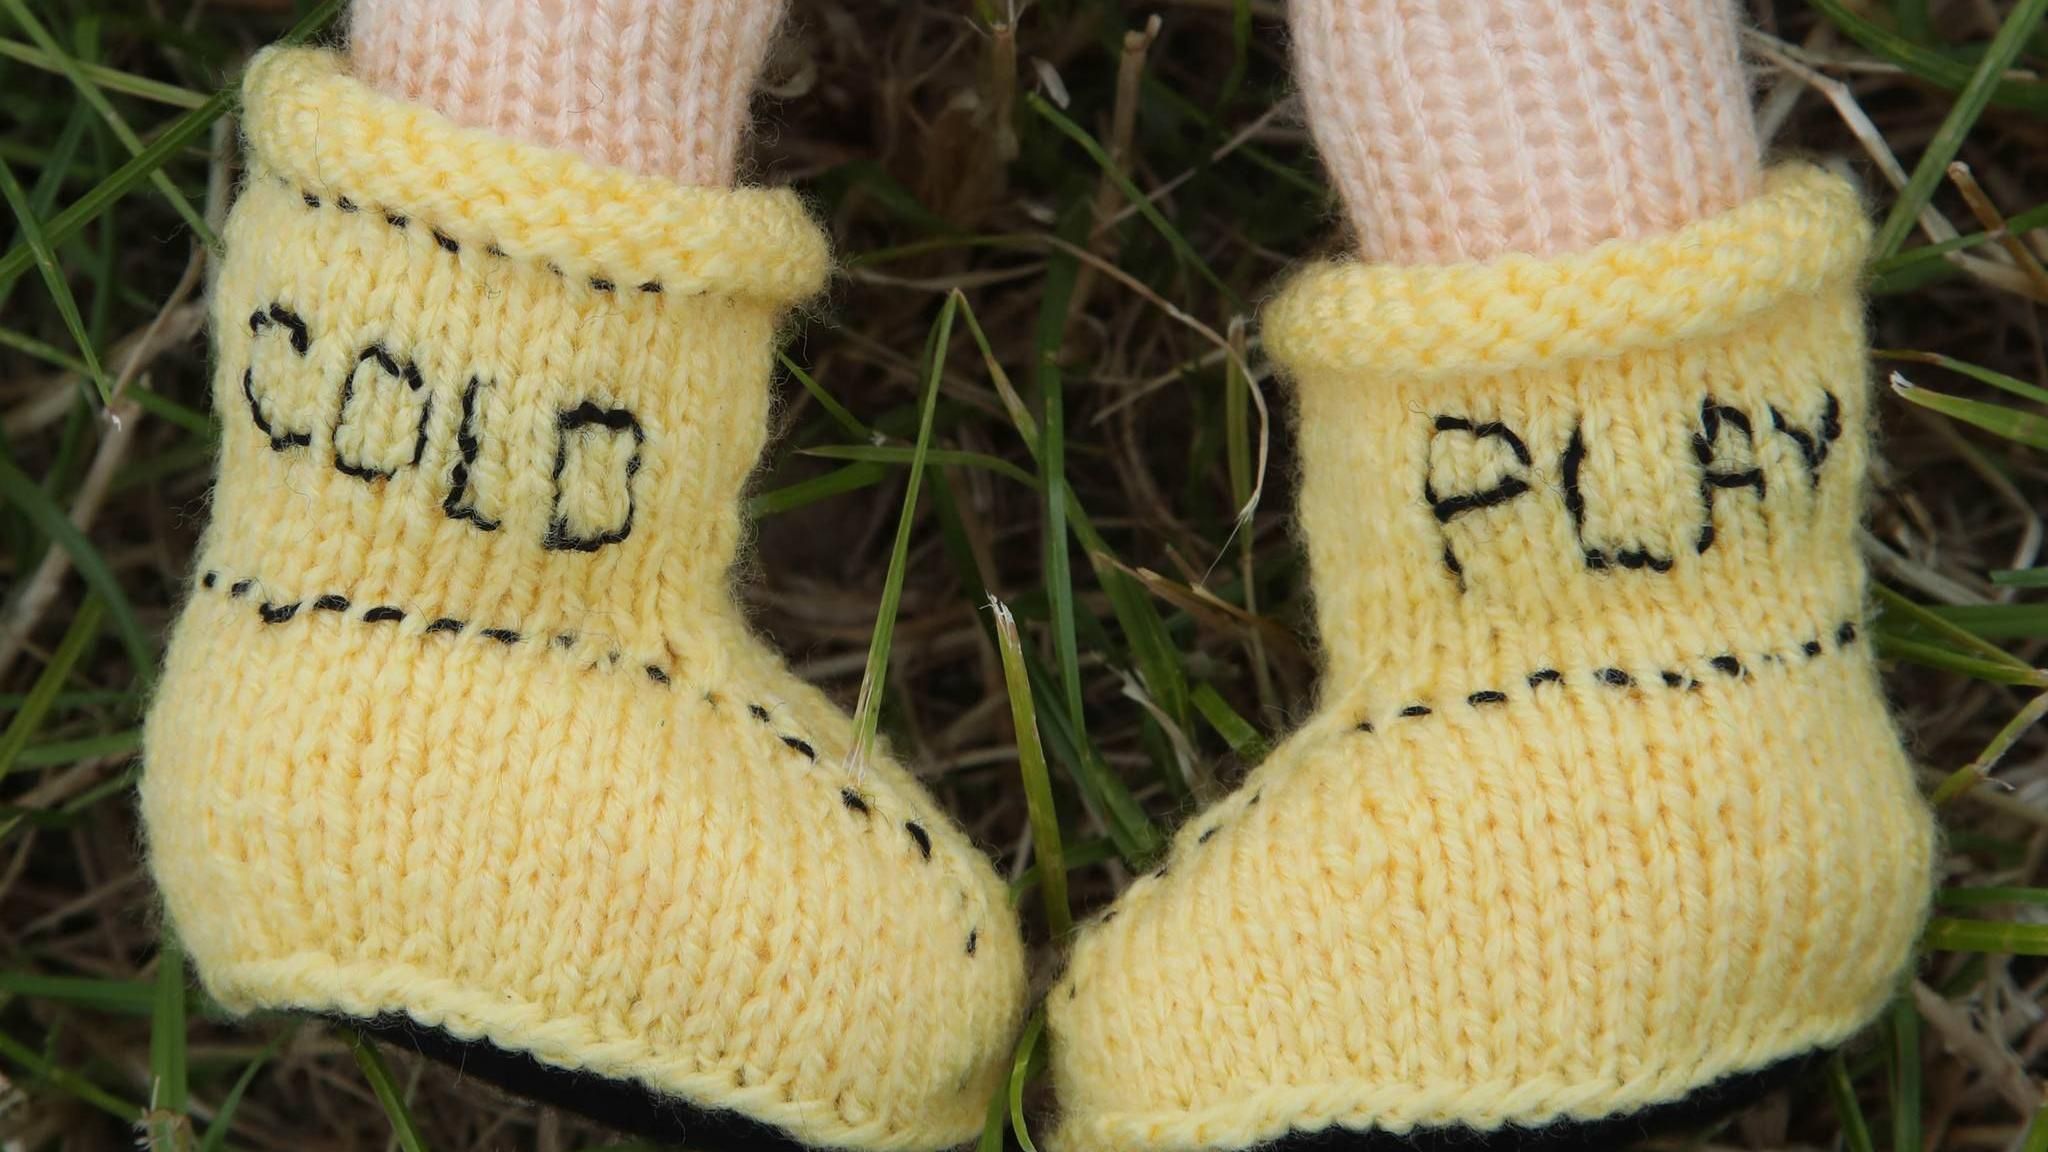 A close up of knitted yellow boots on the grass that say the words 'Cold' and 'Play' on each